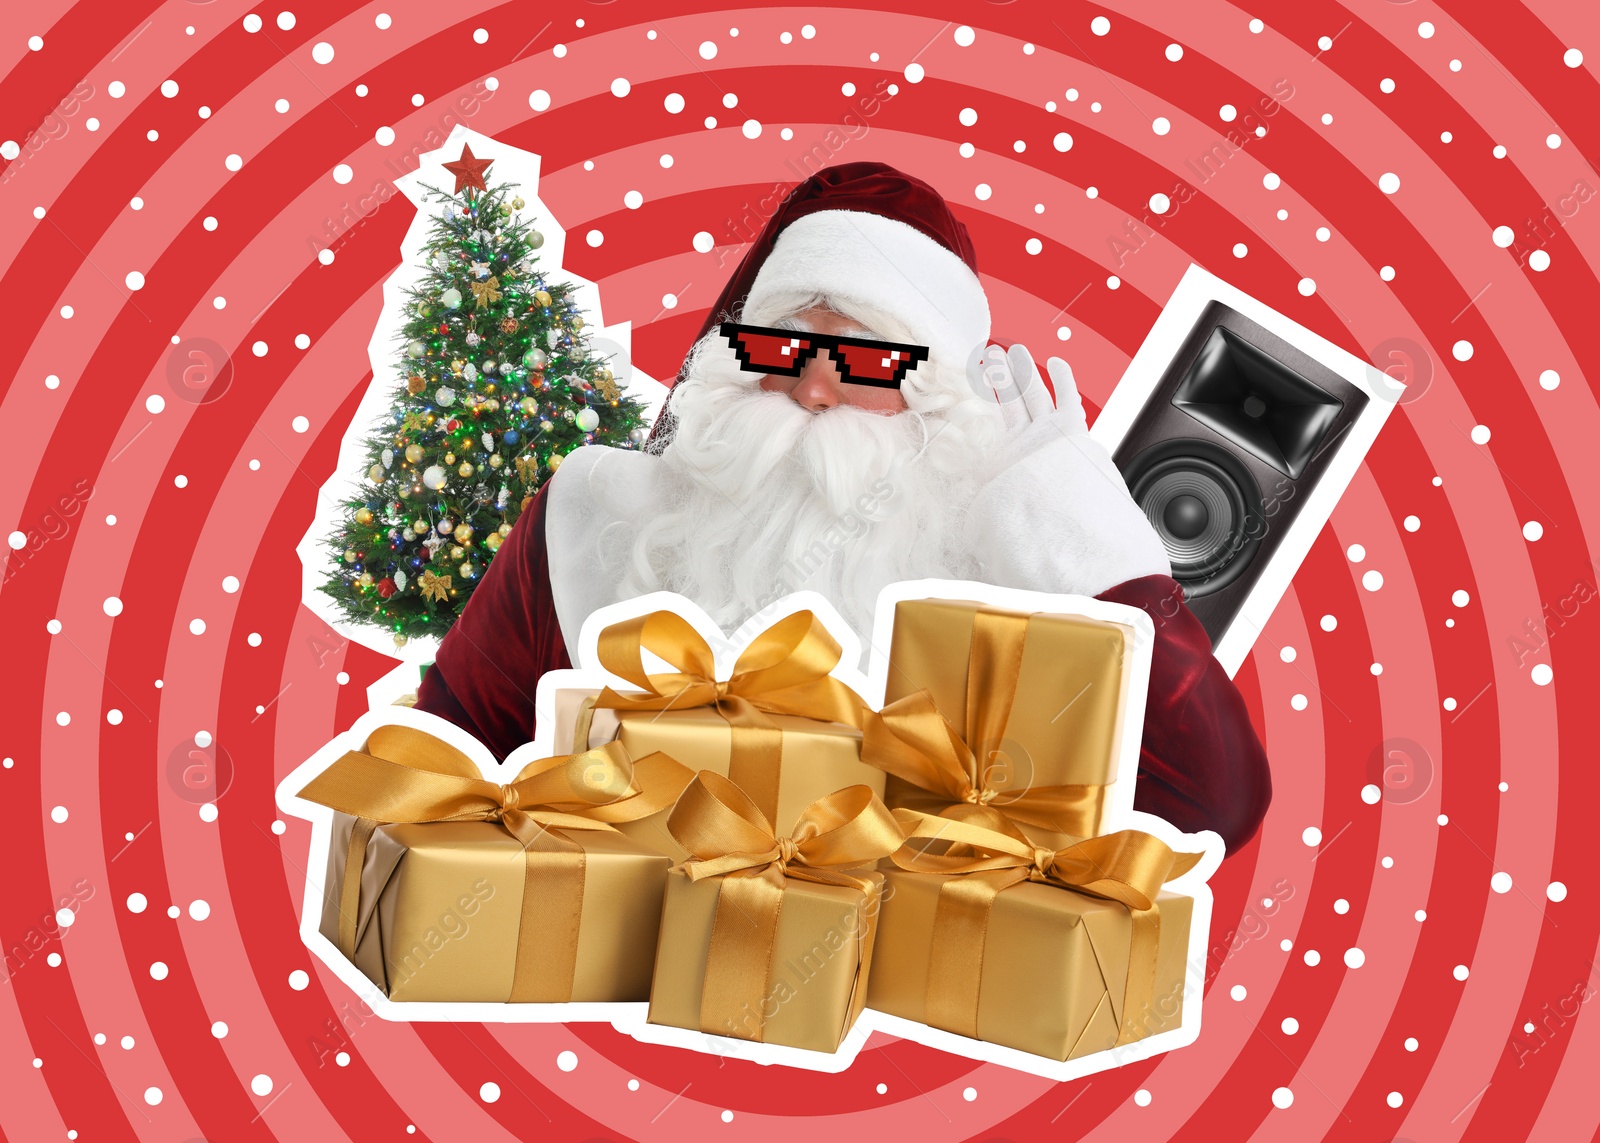 Image of Winter holidays bright artwork. Santa Claus with party sunglasses, gift boxes, Christmas tree and sound speaker against color background, creative collage